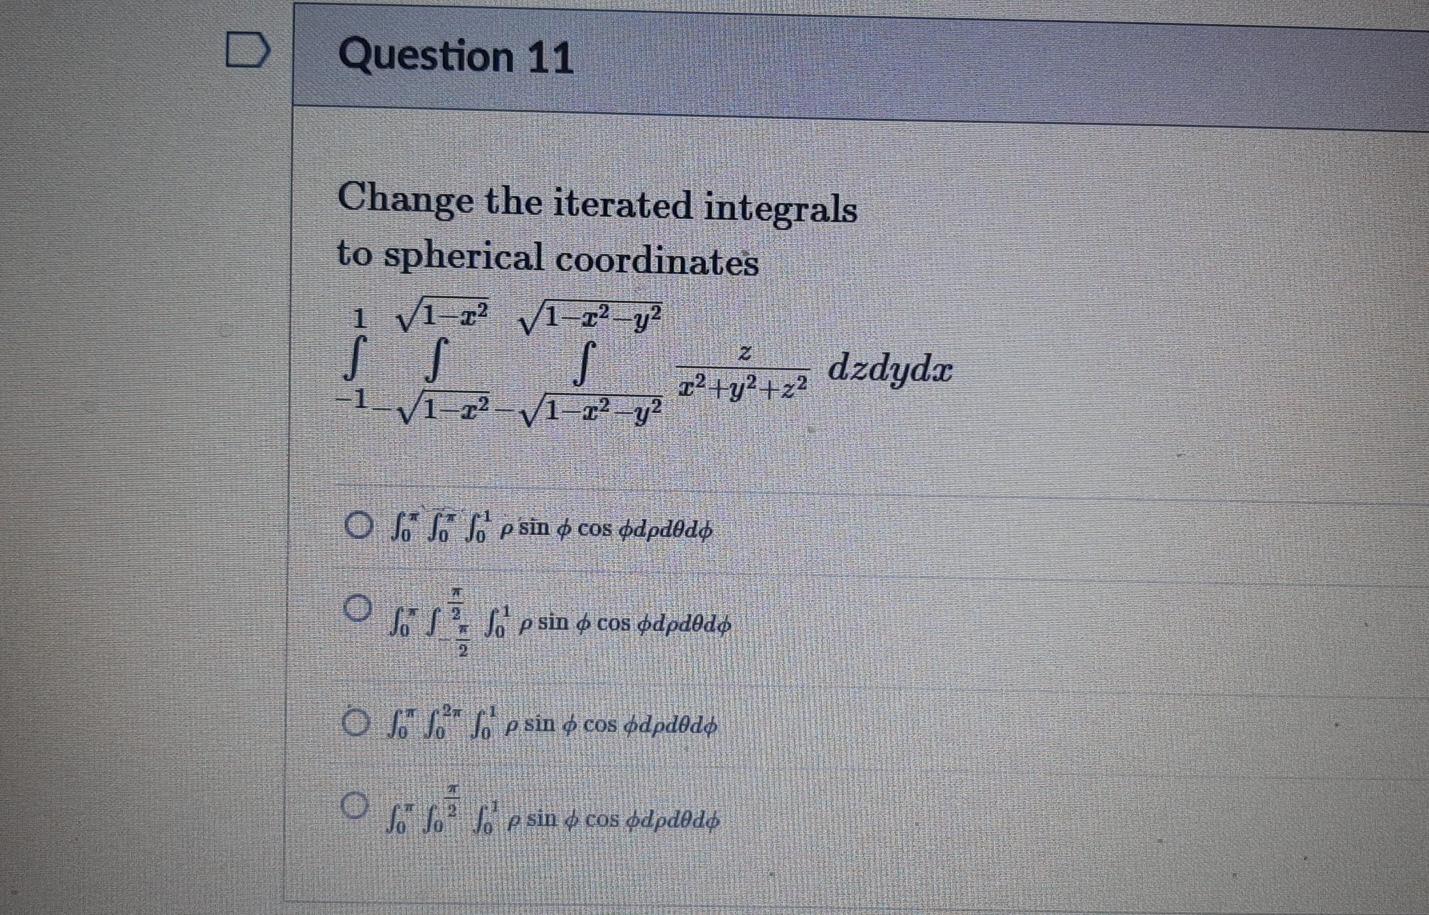 Question 11 Change The Iterated Integrals To Spherical Coordinates 1 V1 1 2 Y2 Ss S Y2 22 V1 22 Y O So So Lo Psin 1